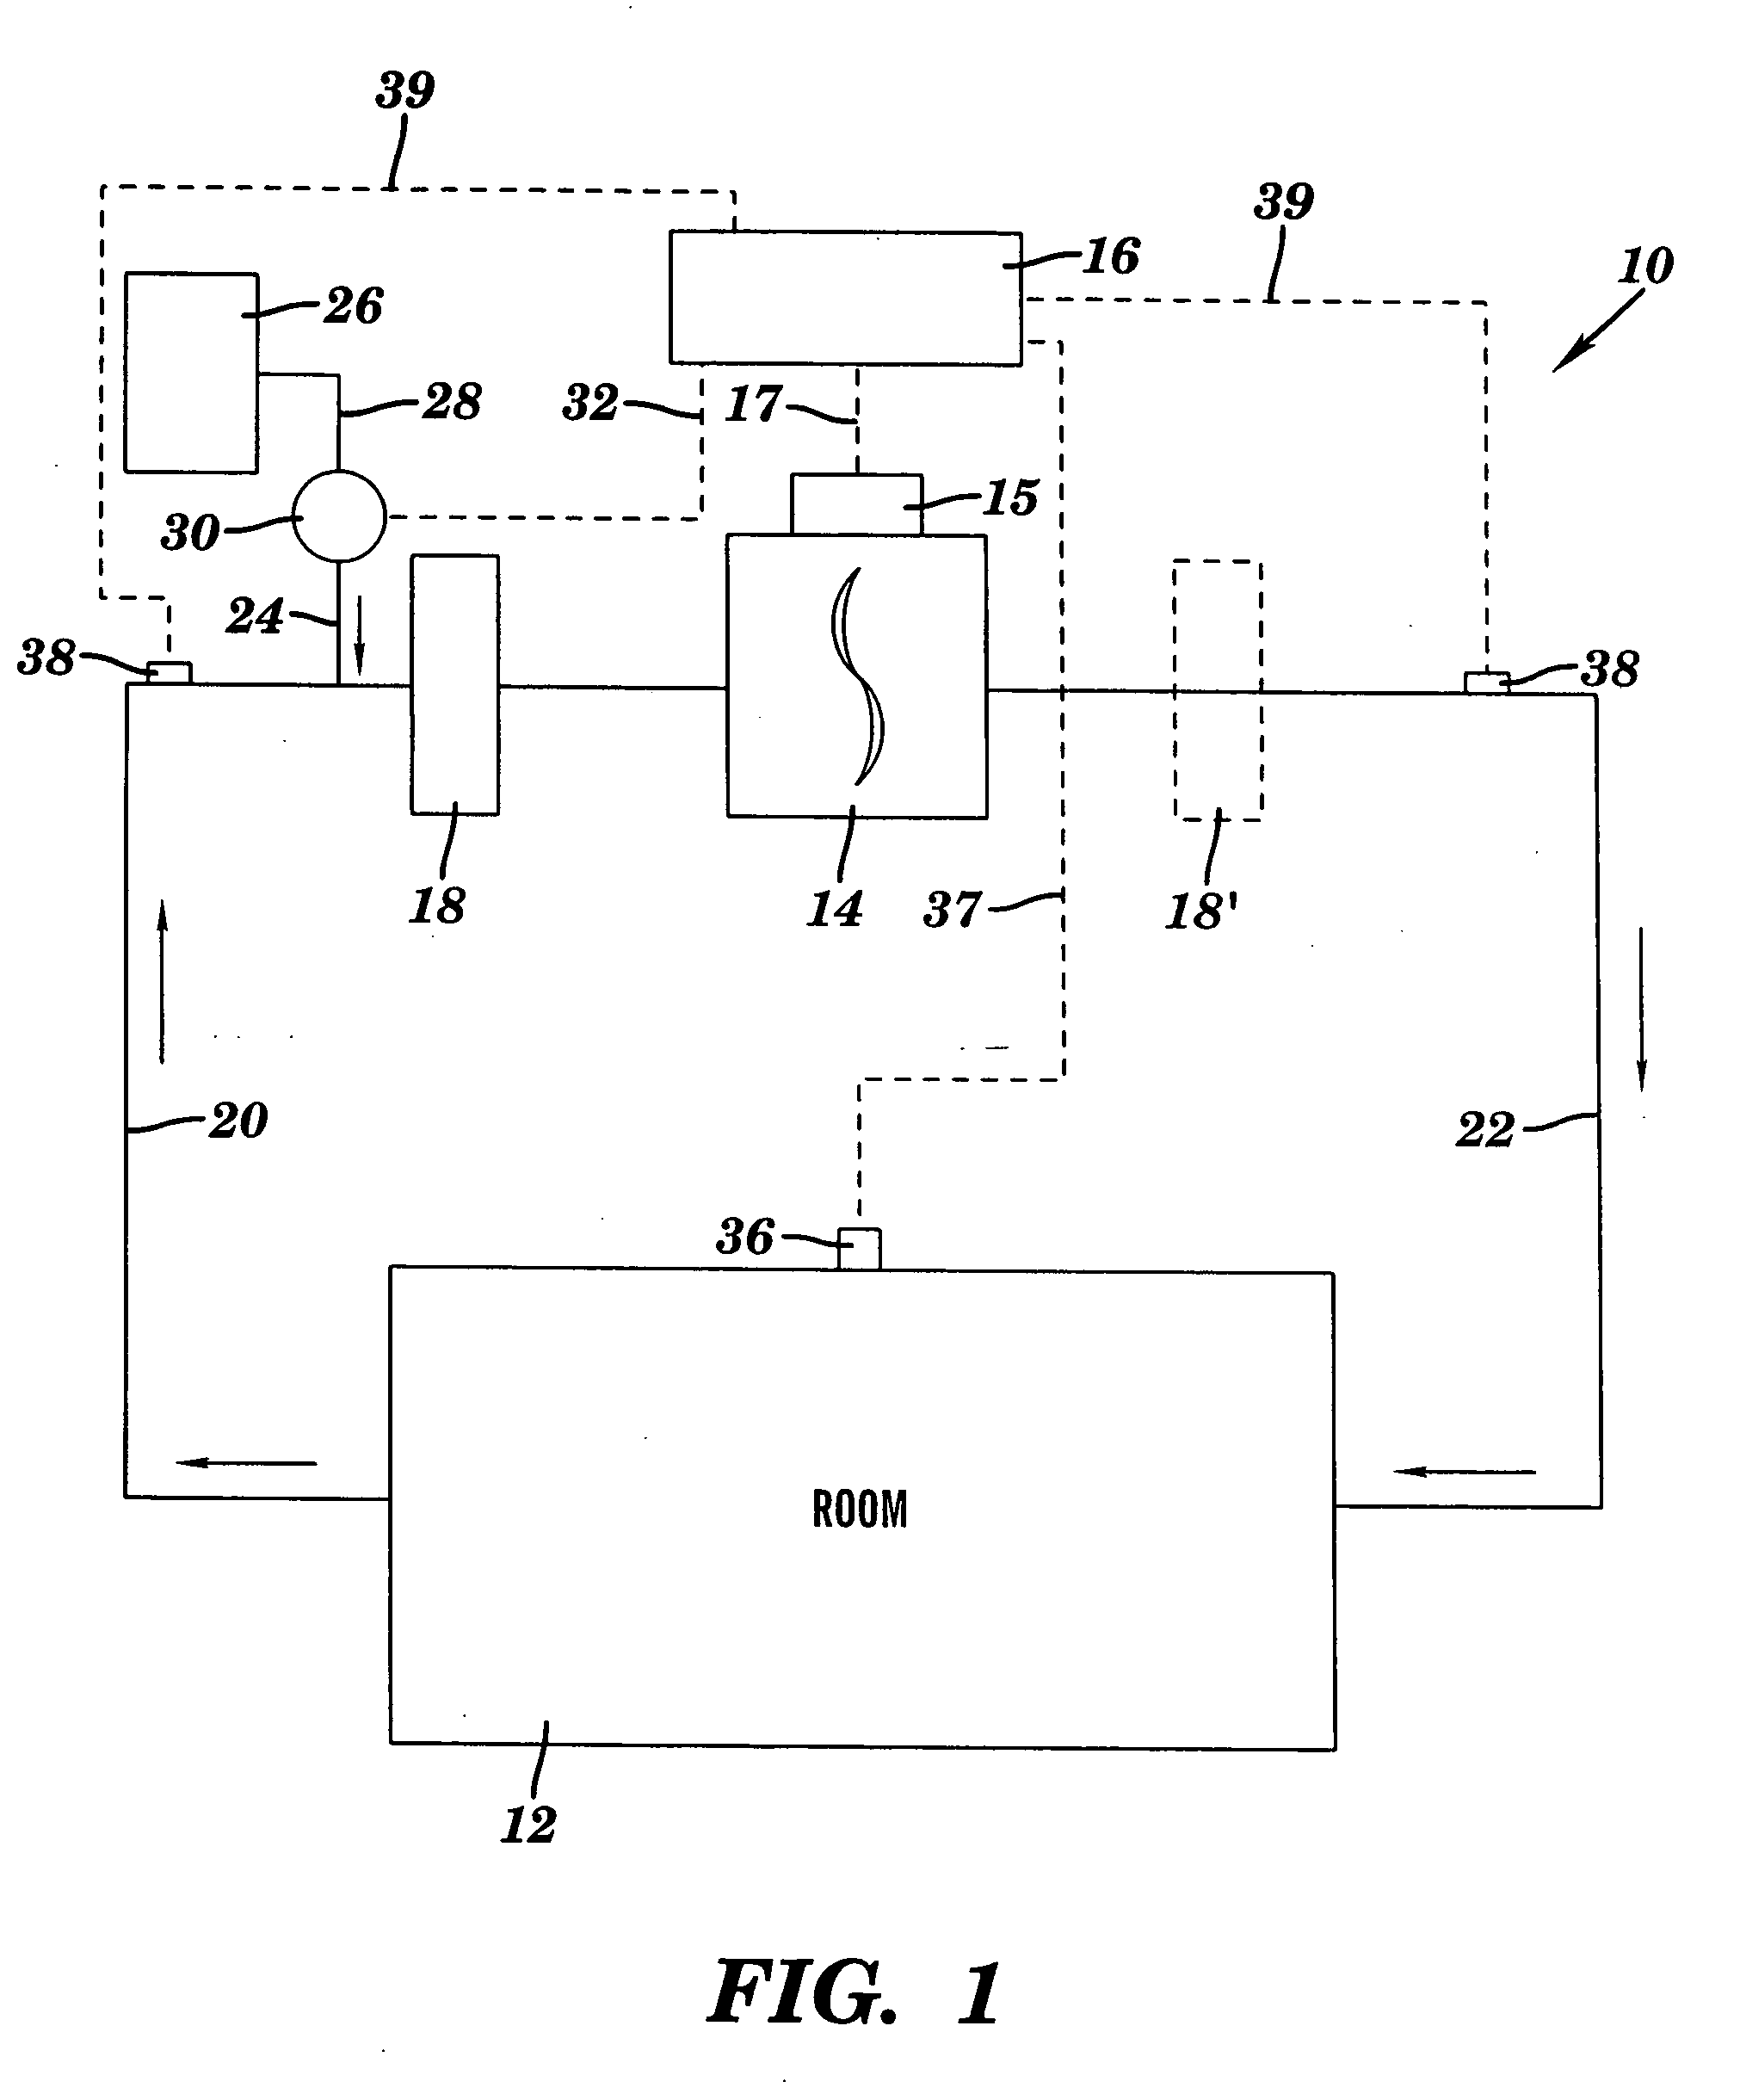 Systems and methods for controlling room air quality